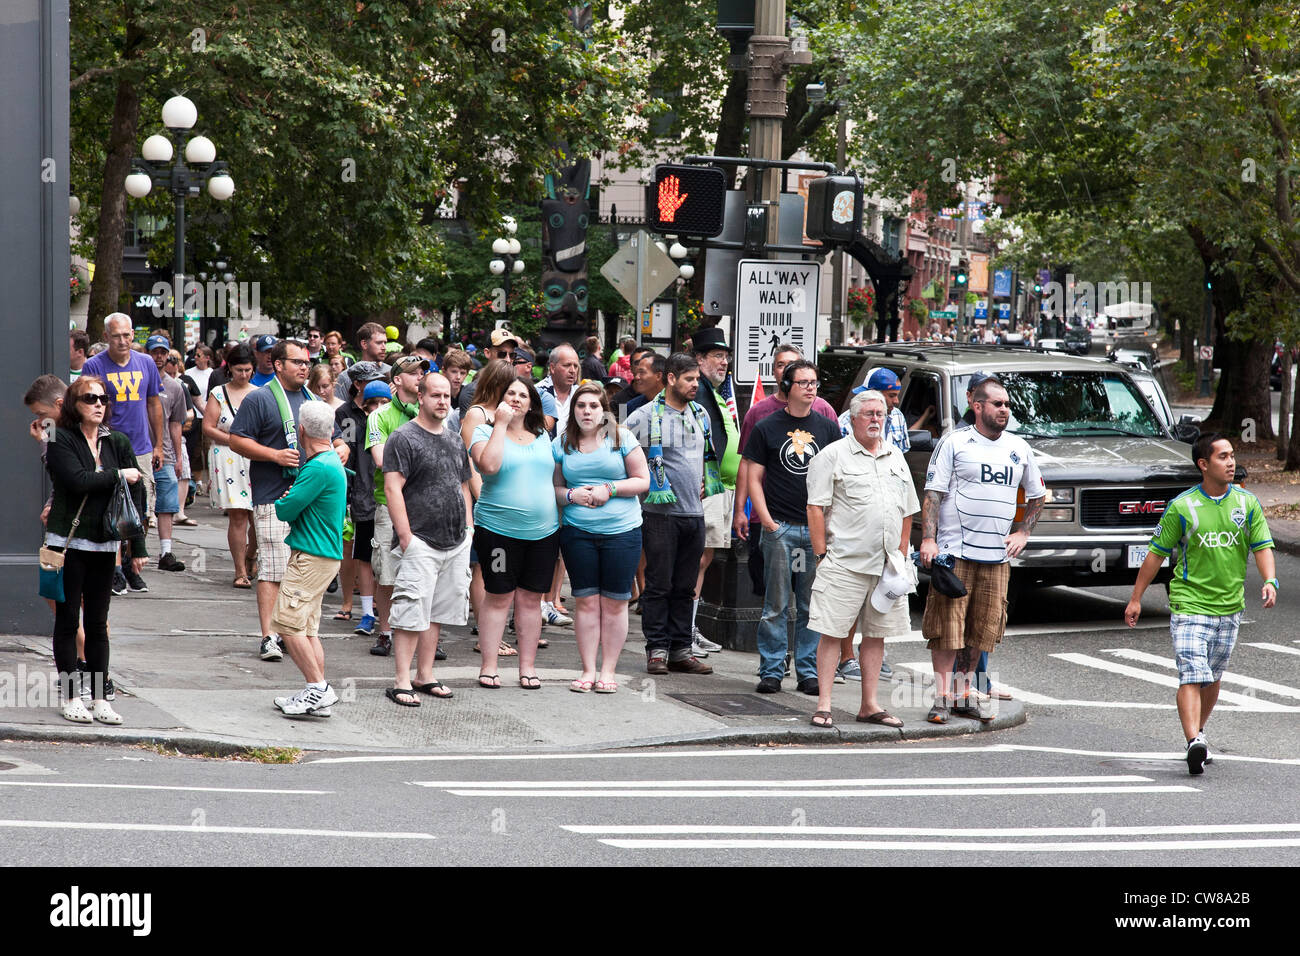 crowd Seattle Sounders soccer fans waiting to cross Pioneer Square at allway walk intersection after watching team defeat Vancouver White Caps Stock Photo